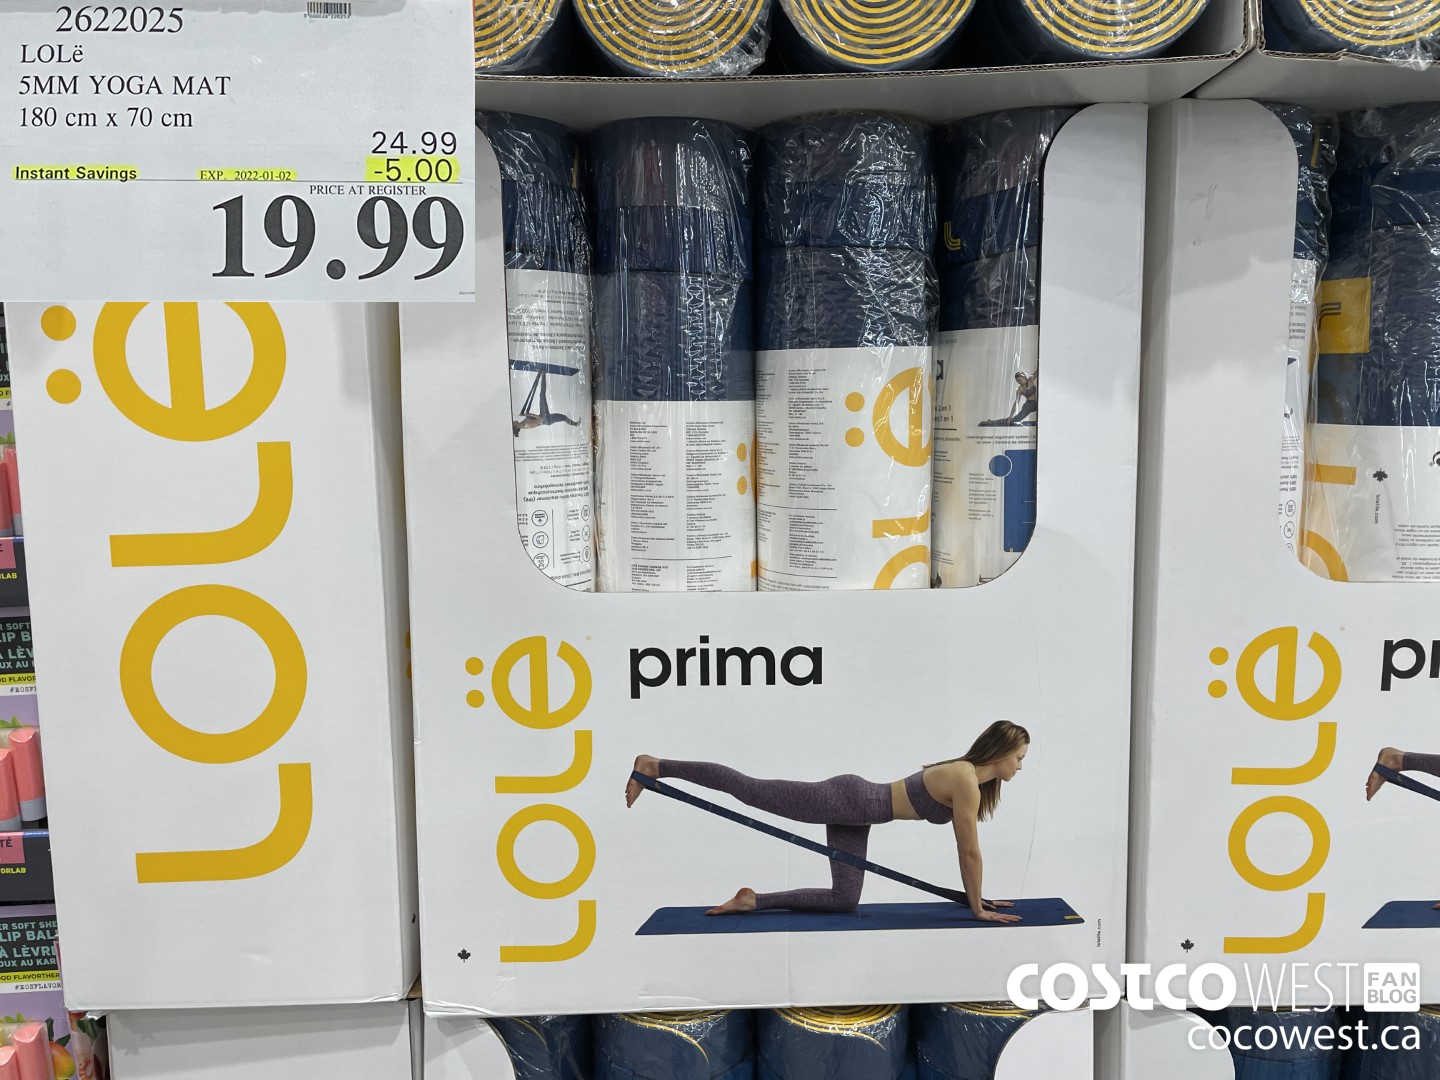 Weekend Update! – Costco Sale Items for Dec 10-12, 2021 for BC, AB, MB, SK  - Costco West Fan Blog